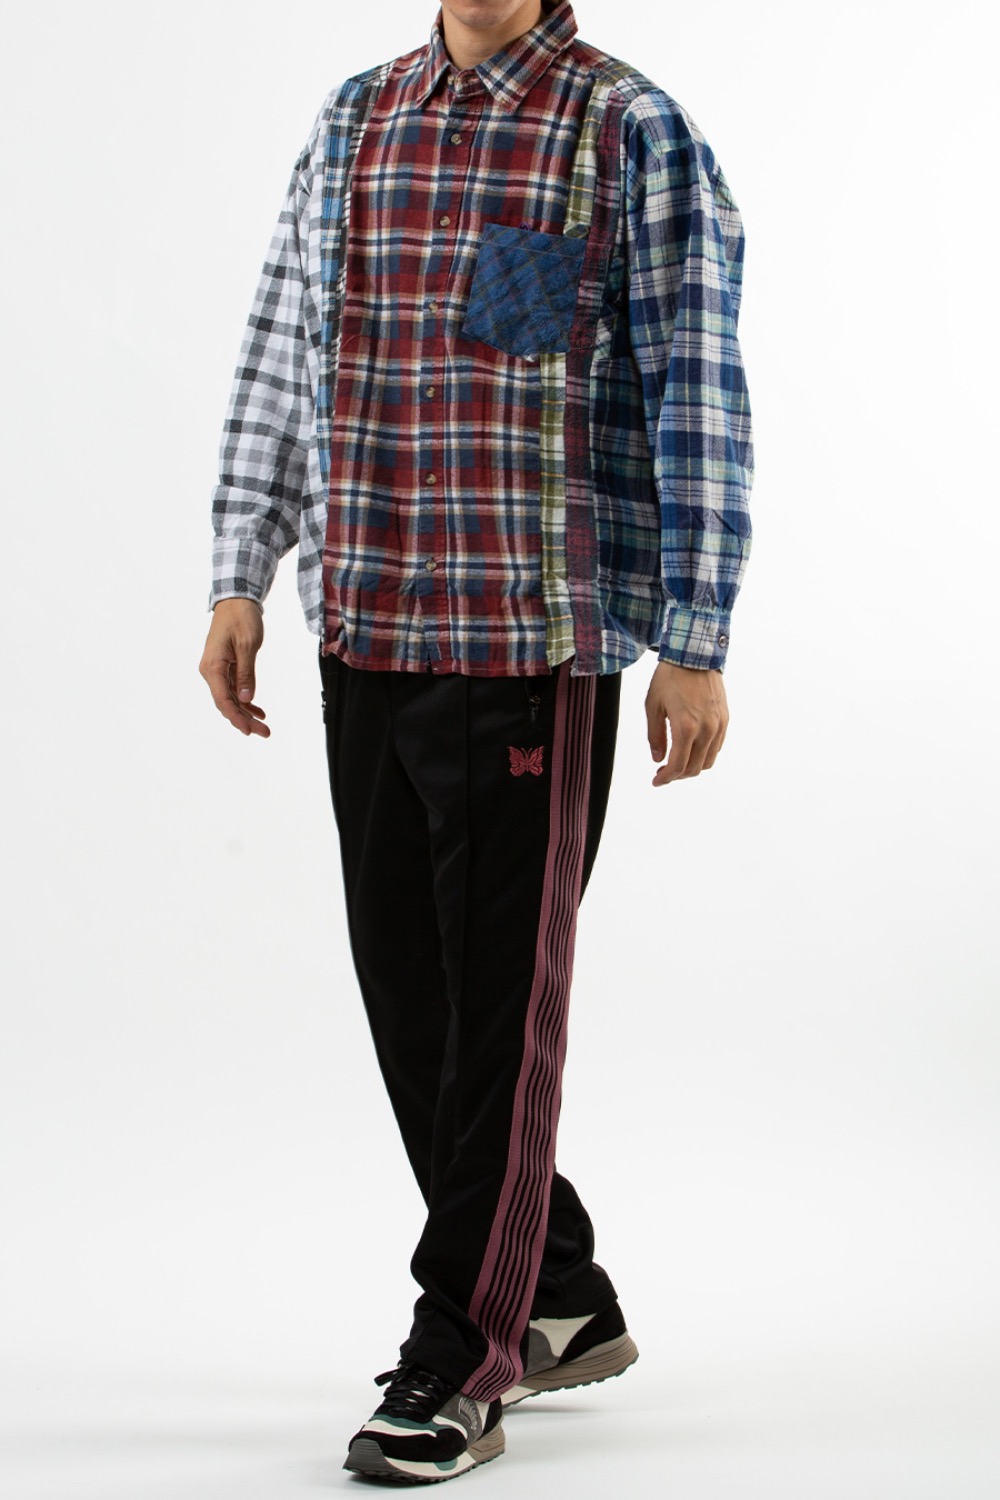 (22FW) - LQ306 Rebuild by Needles Flannel Shirt -&gt; 7 Cuts Wide Shirt (FREE - 5) ASSORTED